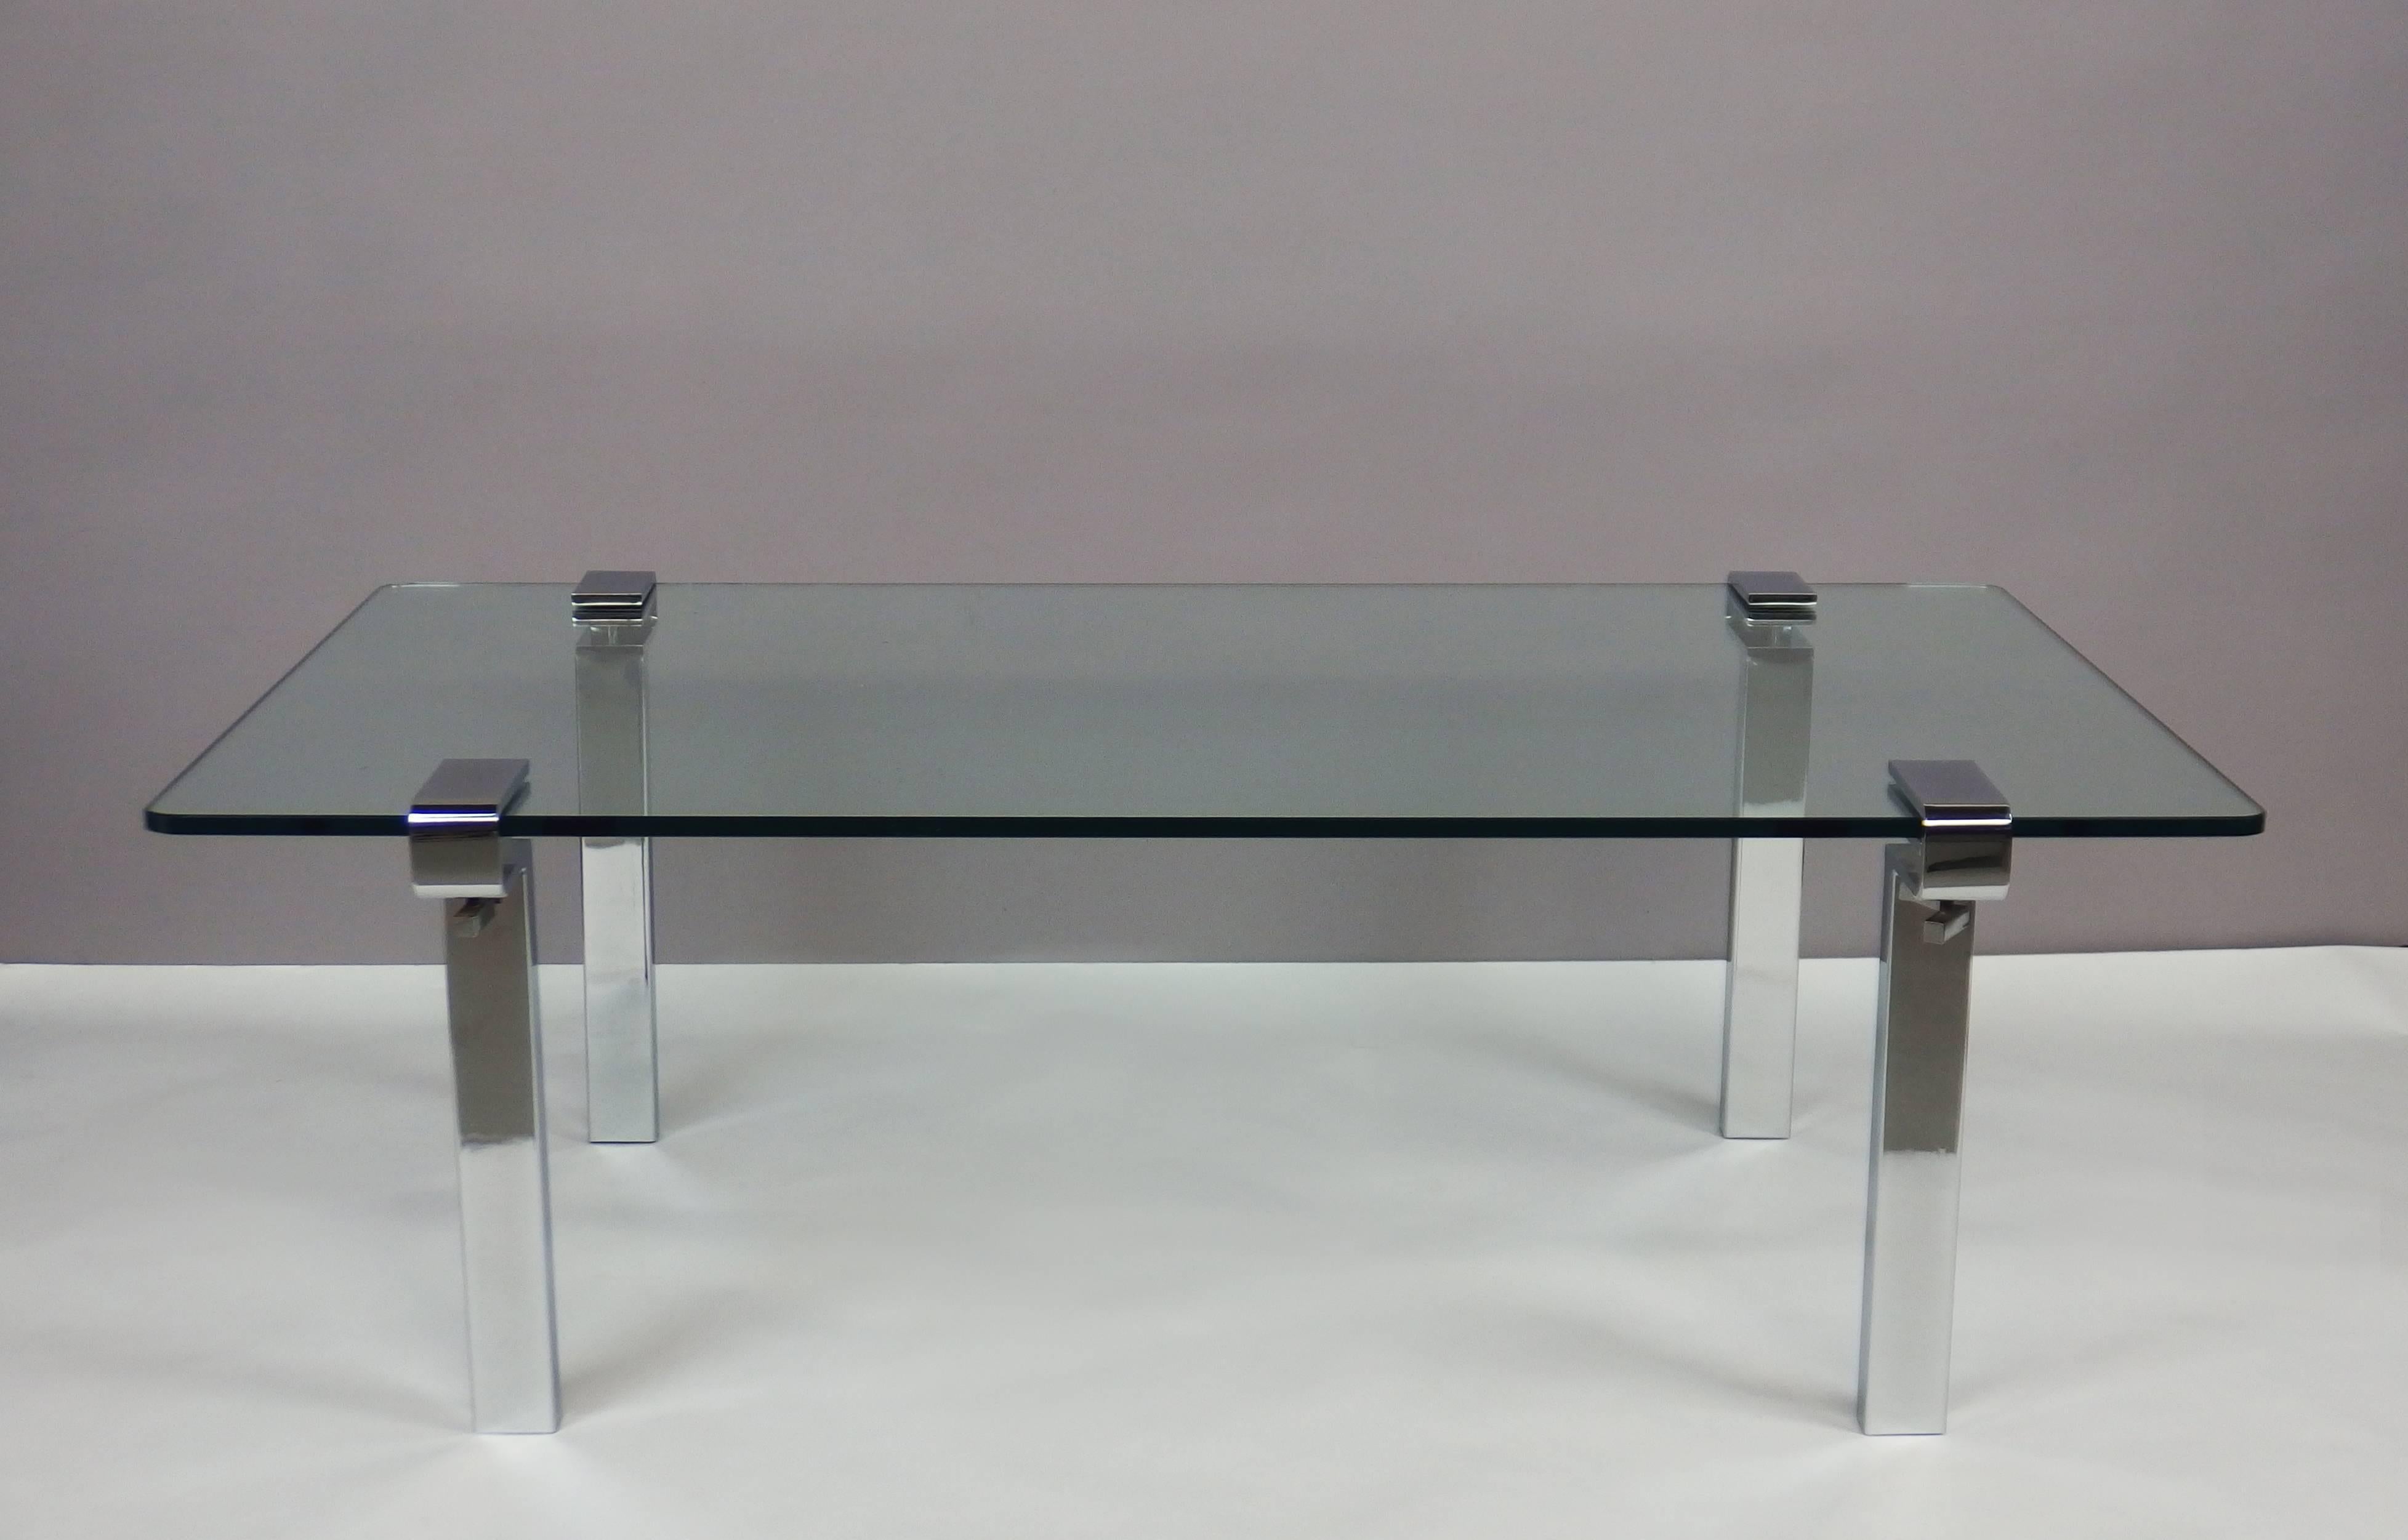 A coffee table with four cramp chromed steel legs holding a glass top.
This table was designed by François Arnal in 1971 and edited by Atelier A (1969-1975).
The cramp system gives the possibility to choose the size, the shape and the material of